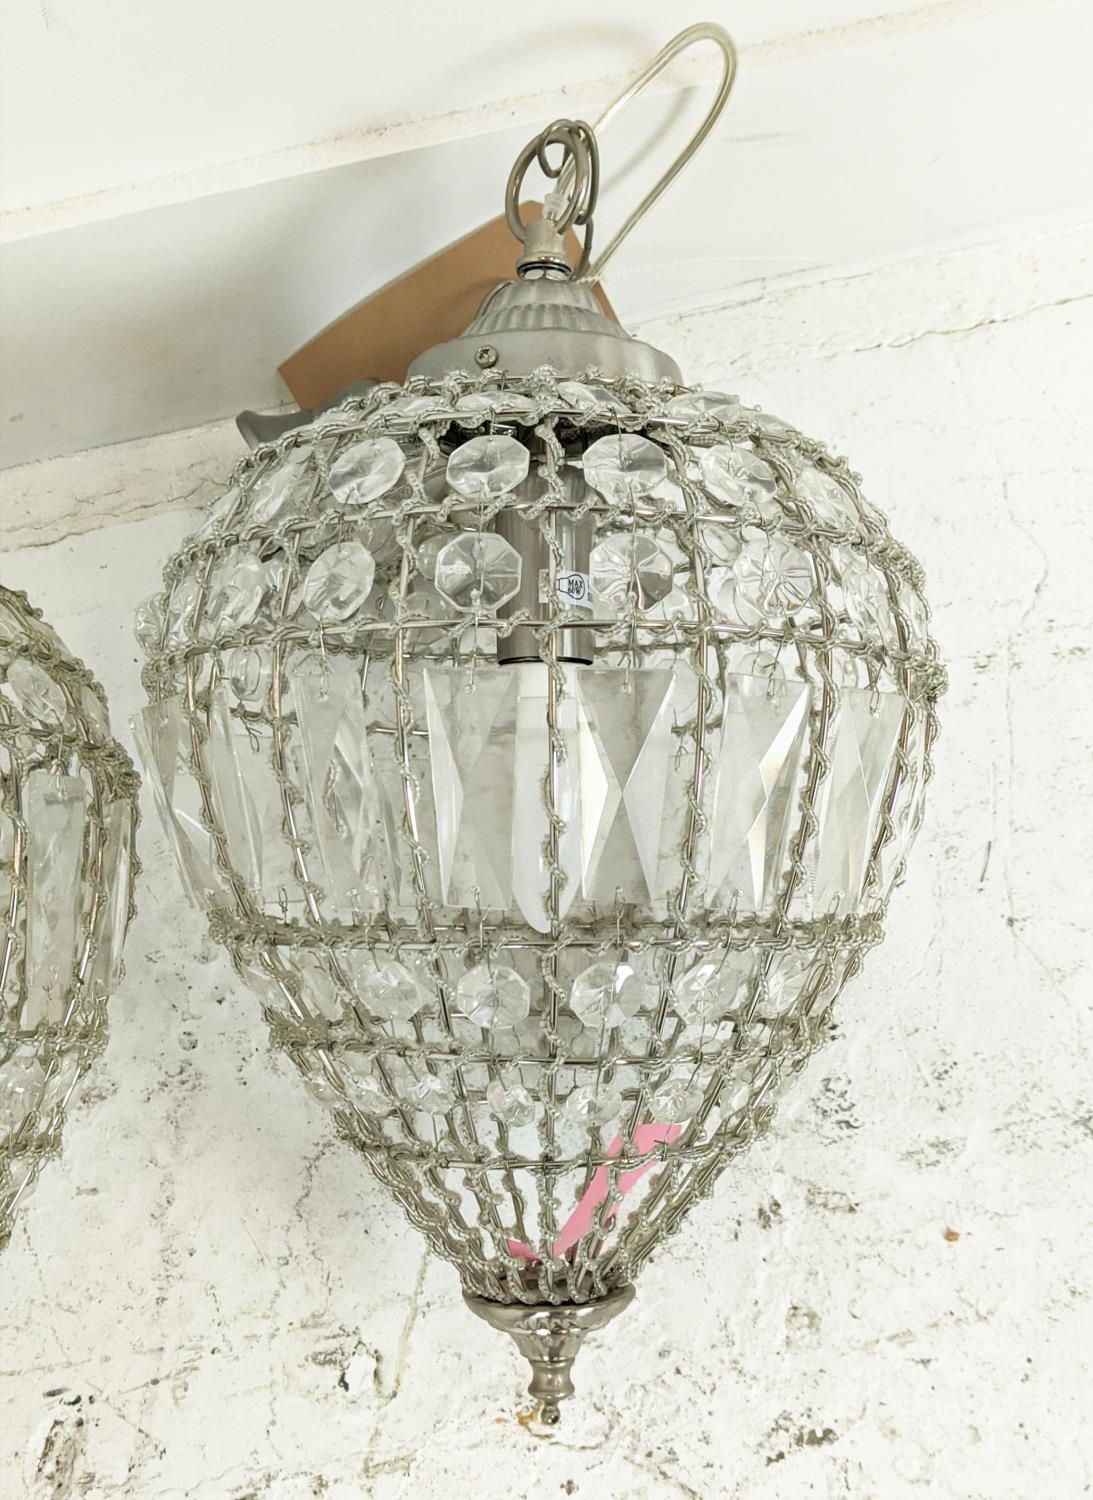 GLASS PENDANT LIGHTS, a set of three, 35cm H, and another larger ribbed glass pendant light, 35cm - Image 2 of 6